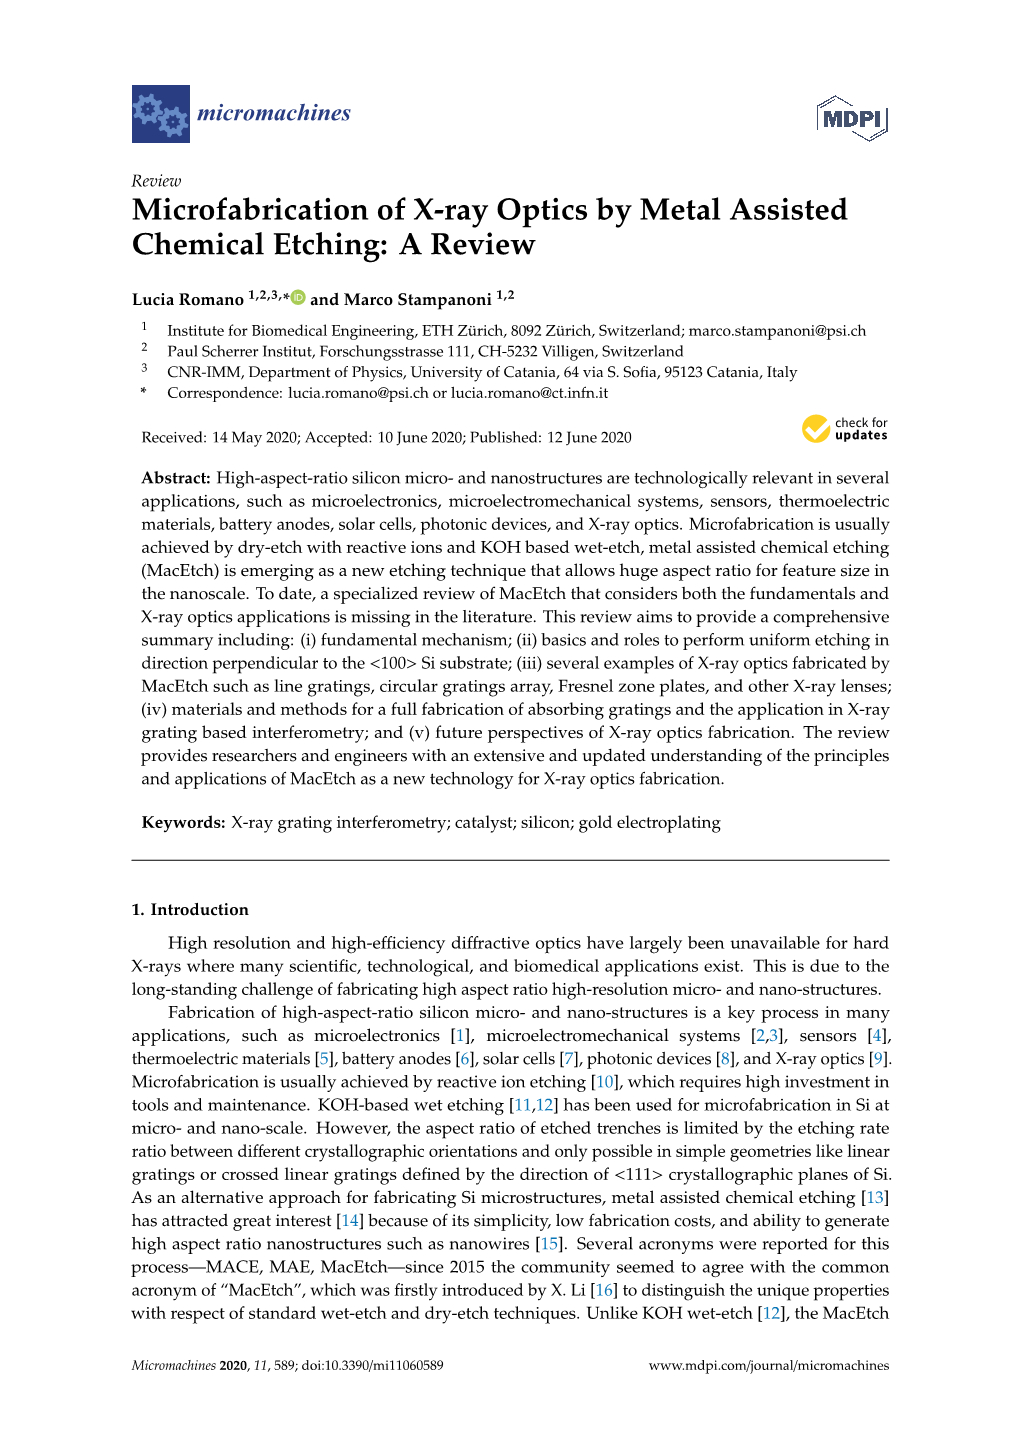 Microfabrication of X-Ray Optics by Metal Assisted Chemical Etching: a Review